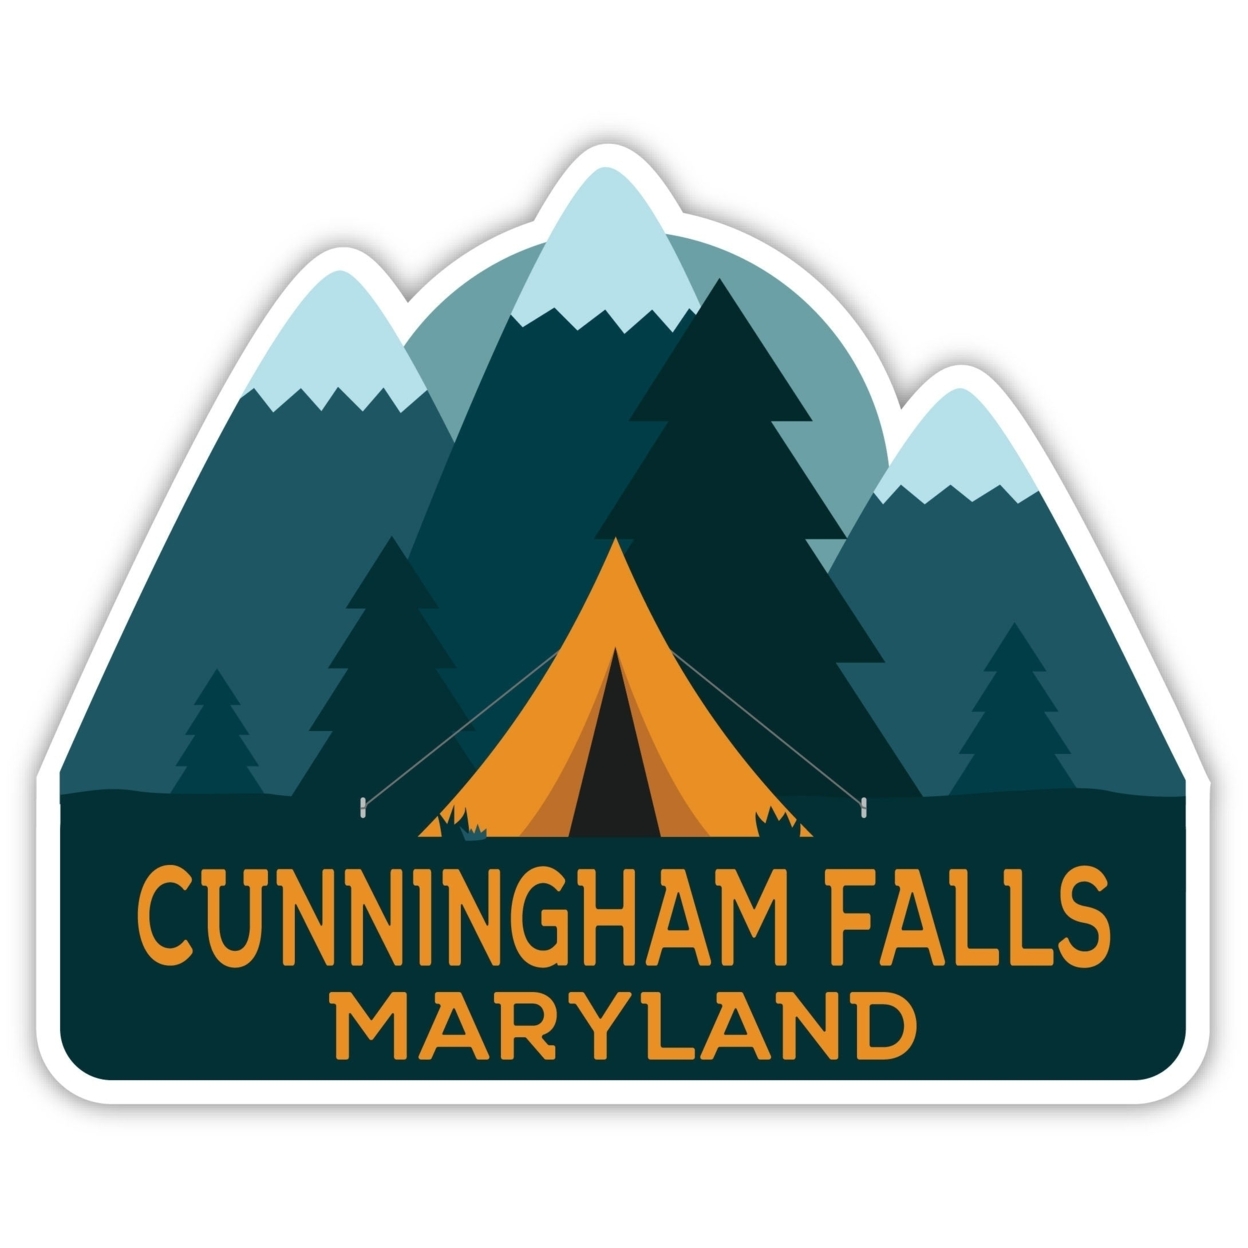 Cunningham Falls Maryland Souvenir Decorative Stickers (Choose Theme And Size) - 4-Pack, 12-Inch, Tent